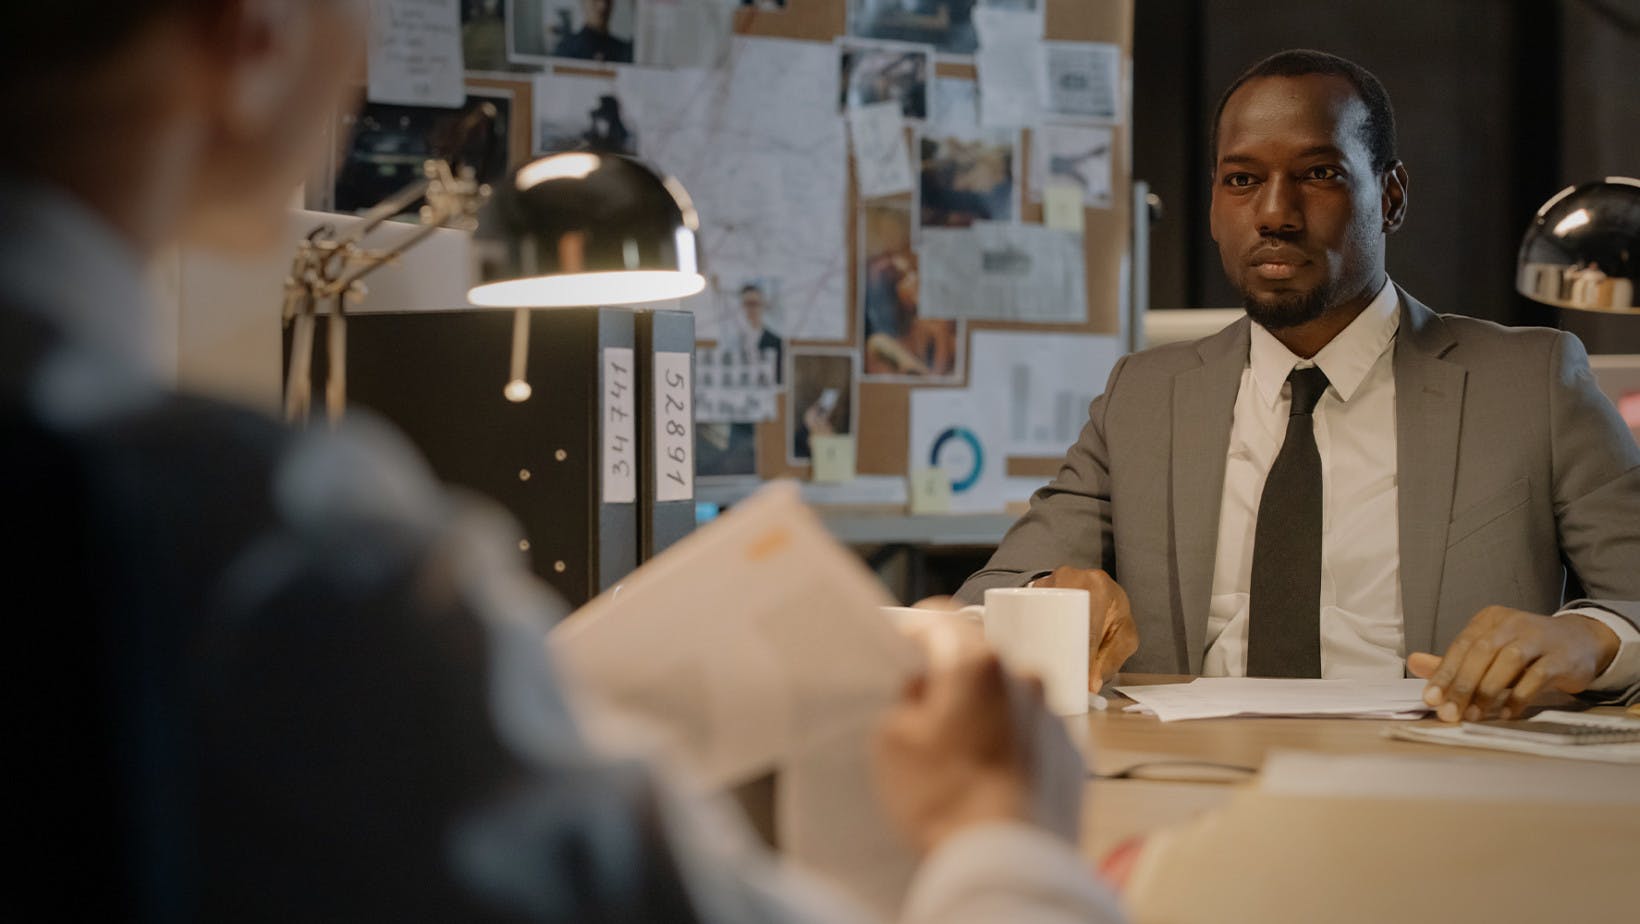 A black man who is a Criminal Psychologist sits at a desk with a colleague blurred in the foreground